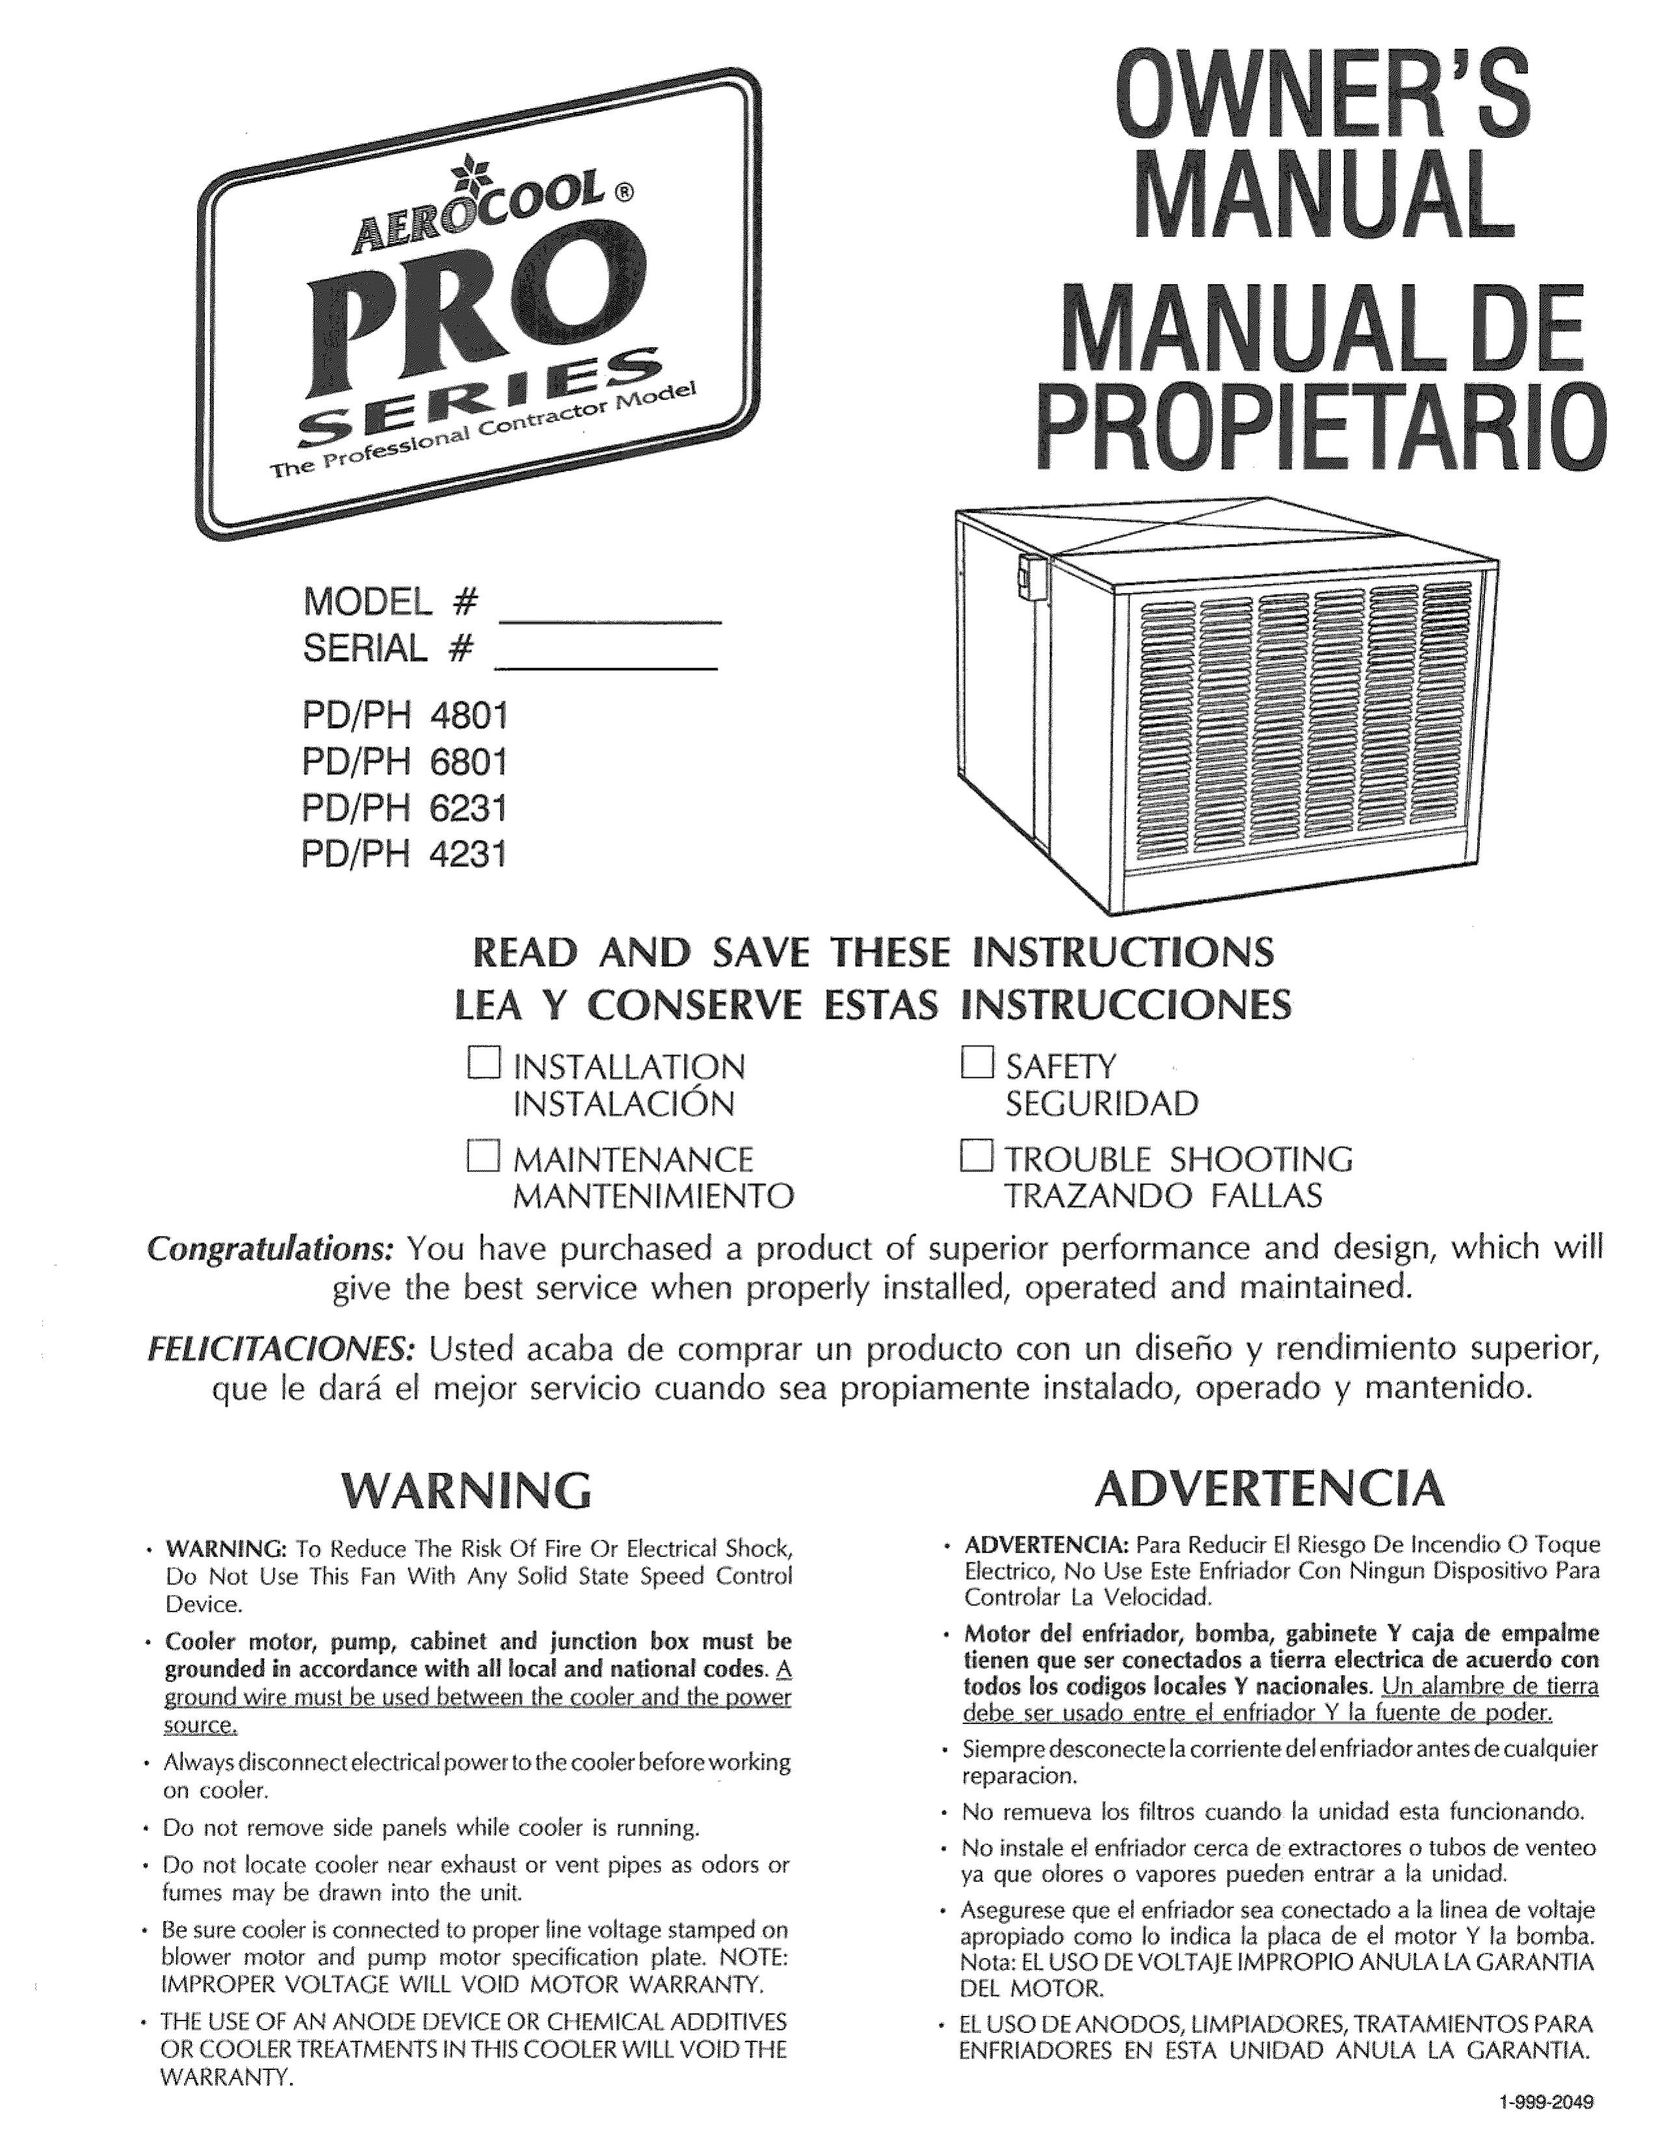 Sears PD6231 Air Conditioner User Manual